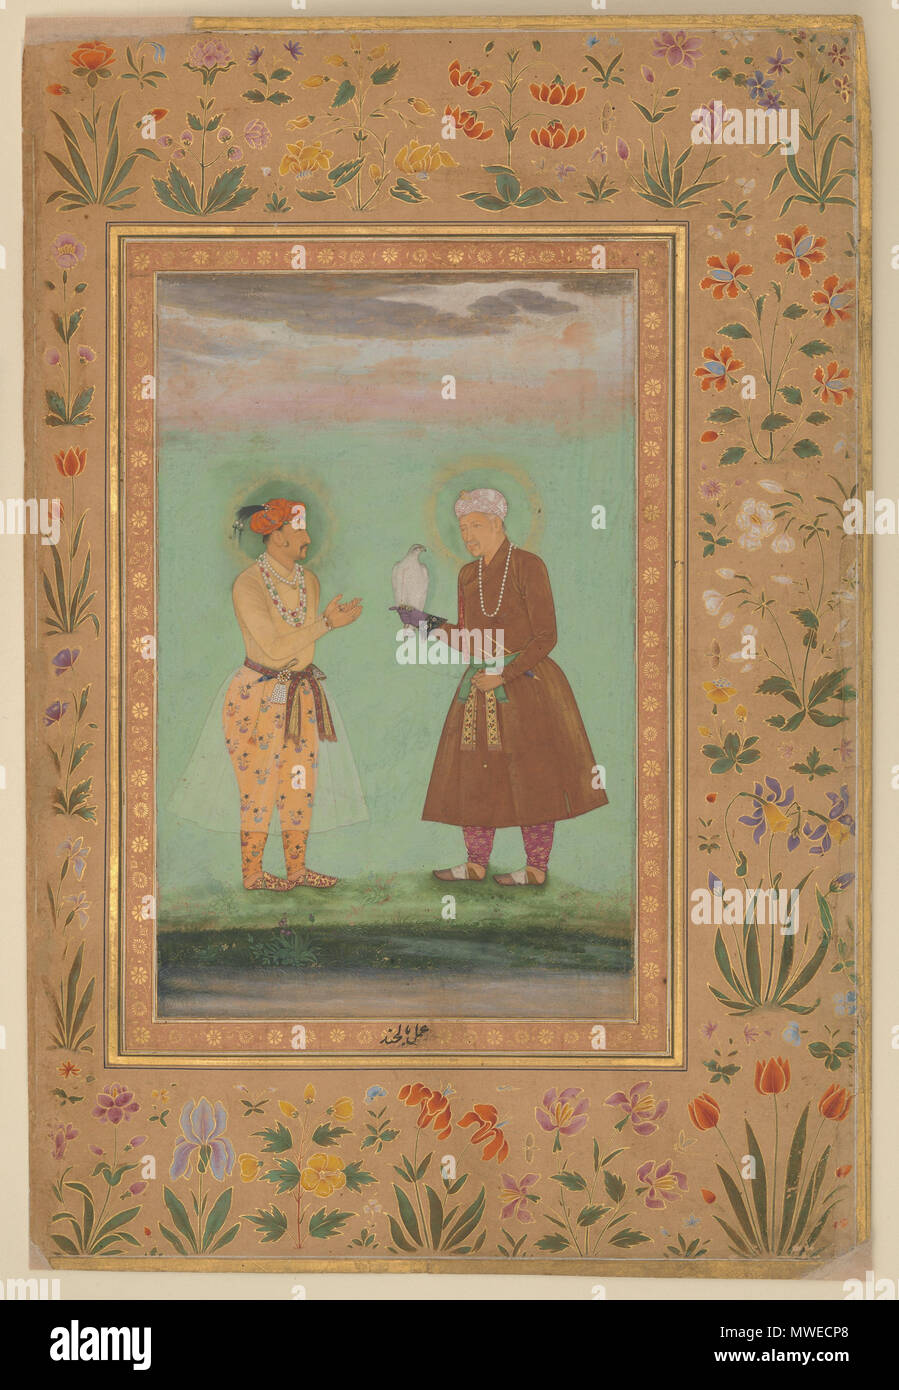 . 'Jahangir and his Father, Akbar', Folio from the Shah Jahan Album Painting by Balachand Calligrapher:   Mir 'Ali Haravi (d. ca. 1550) Object Name:   Album leaf Reign:   Shah Jahan (1628–58), verso Date:   verso: ca. 1630; recto: ca.1540–50 Geography:   India Medium:   Ink, opaque watercolor, and gold on paper Dimensions:   H. 15 3/8 in. (39 cm) W. 10 3/8 in. (26.3 cm) Classification:   Codices Credit Line:   Purchase, Rogers Fund and The Kevorkian Foundation Gift, 1955 Accession Number:   55.121.10.19 This artwork is not on display   Share  Add to MyMet   Signatures, Inscriptions, and Markin Stock Photo